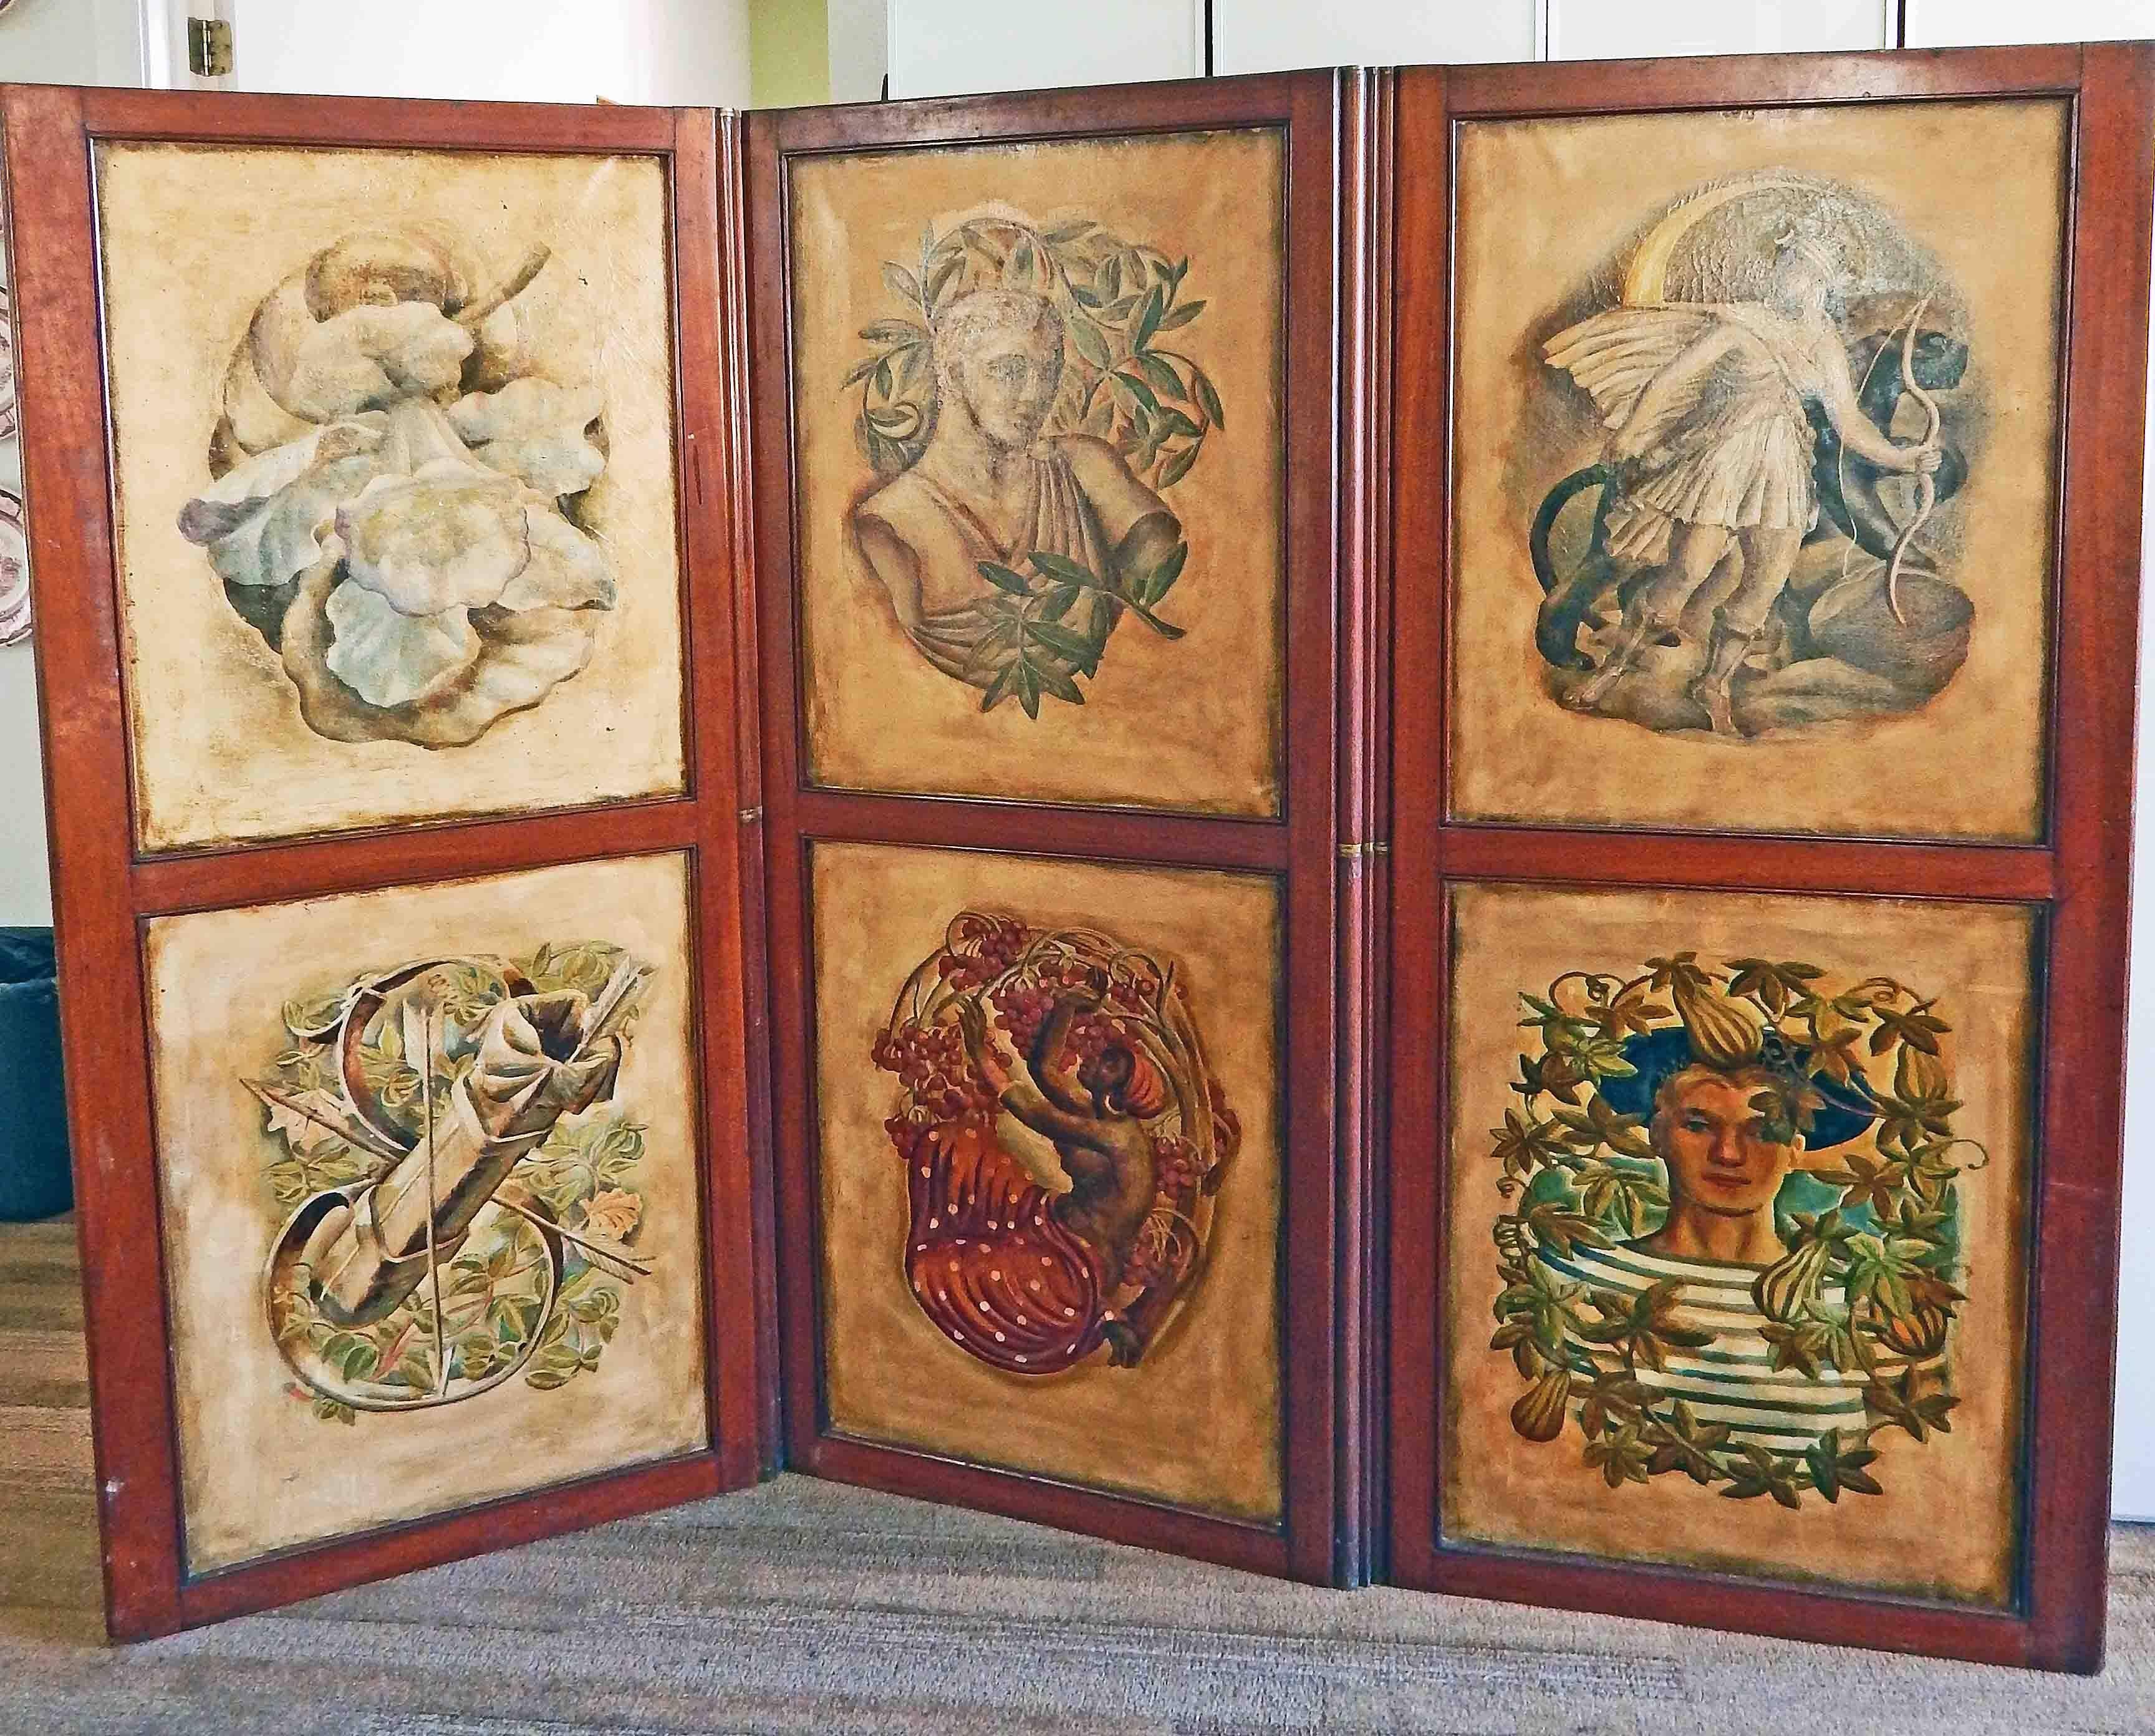 This stunning assemblage of 12 Art Deco paintings, depicting mythological and 1930s contemporary themes, all in oil on canvas, have been set into a walnut folding screen. The images include Mercury and Diana, sailor and agricultural worker, American